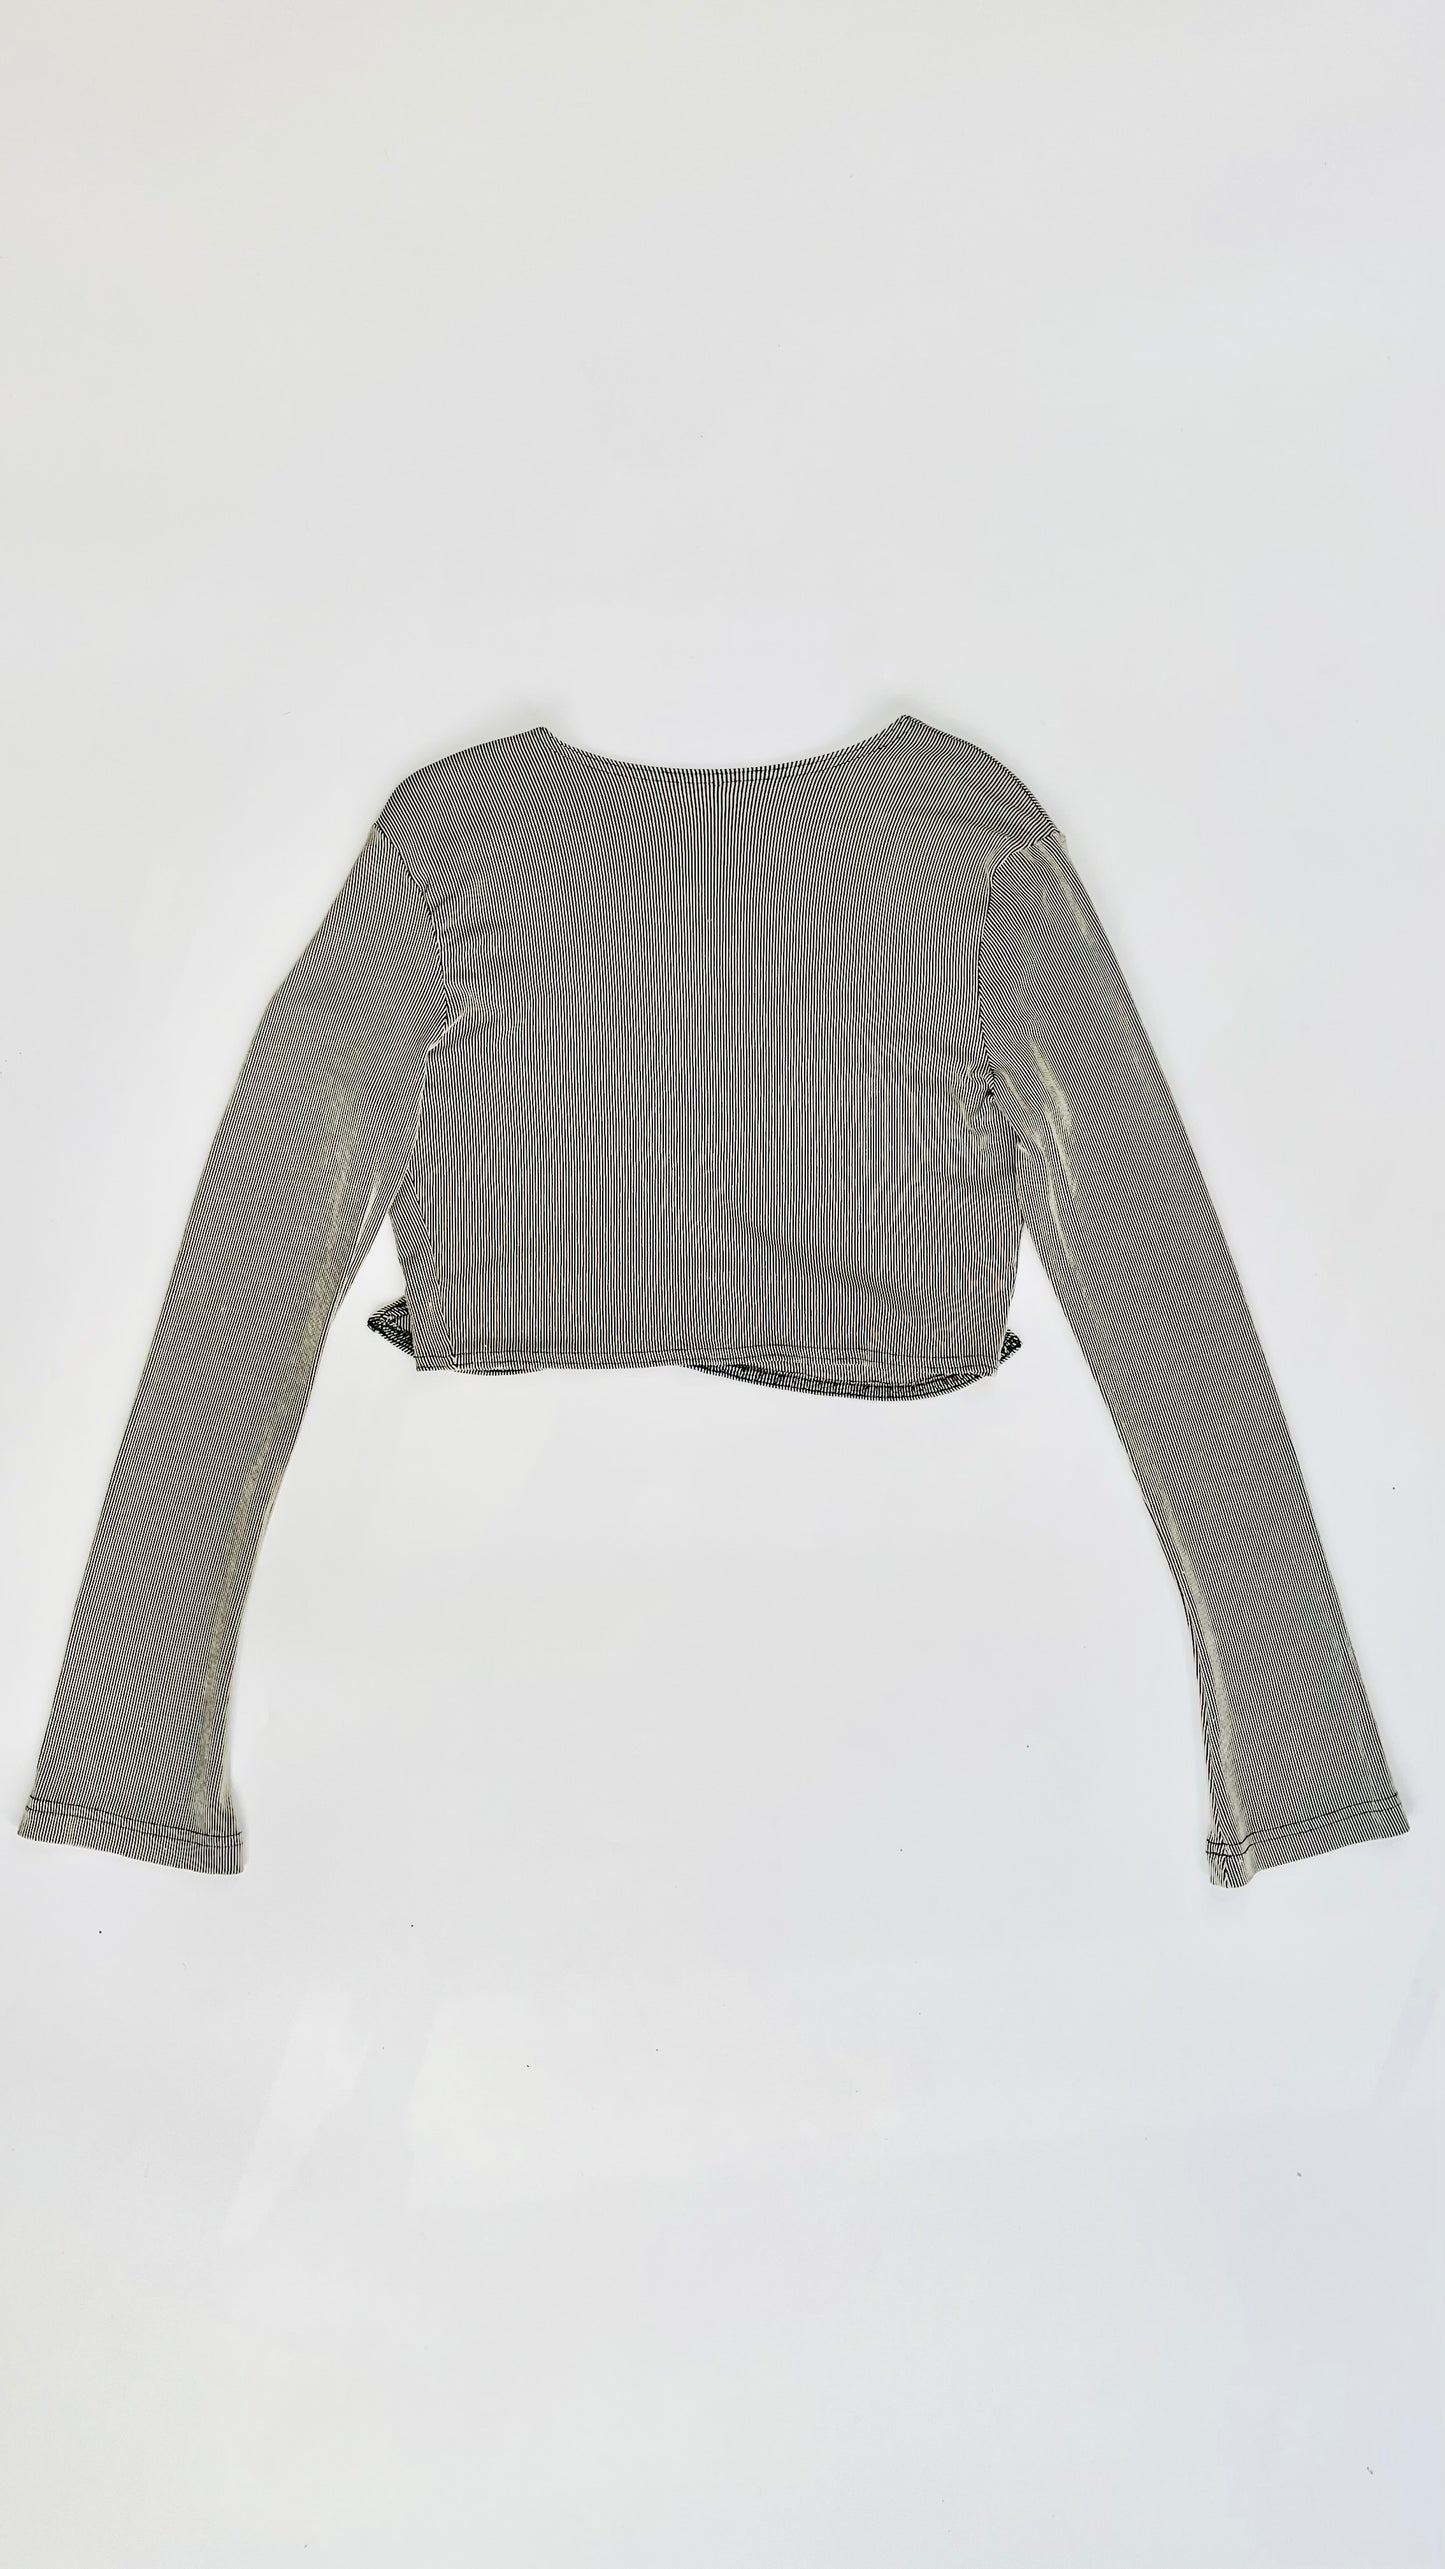 Vintage 90s grey knit long sleeve tie up crop top - Size XS